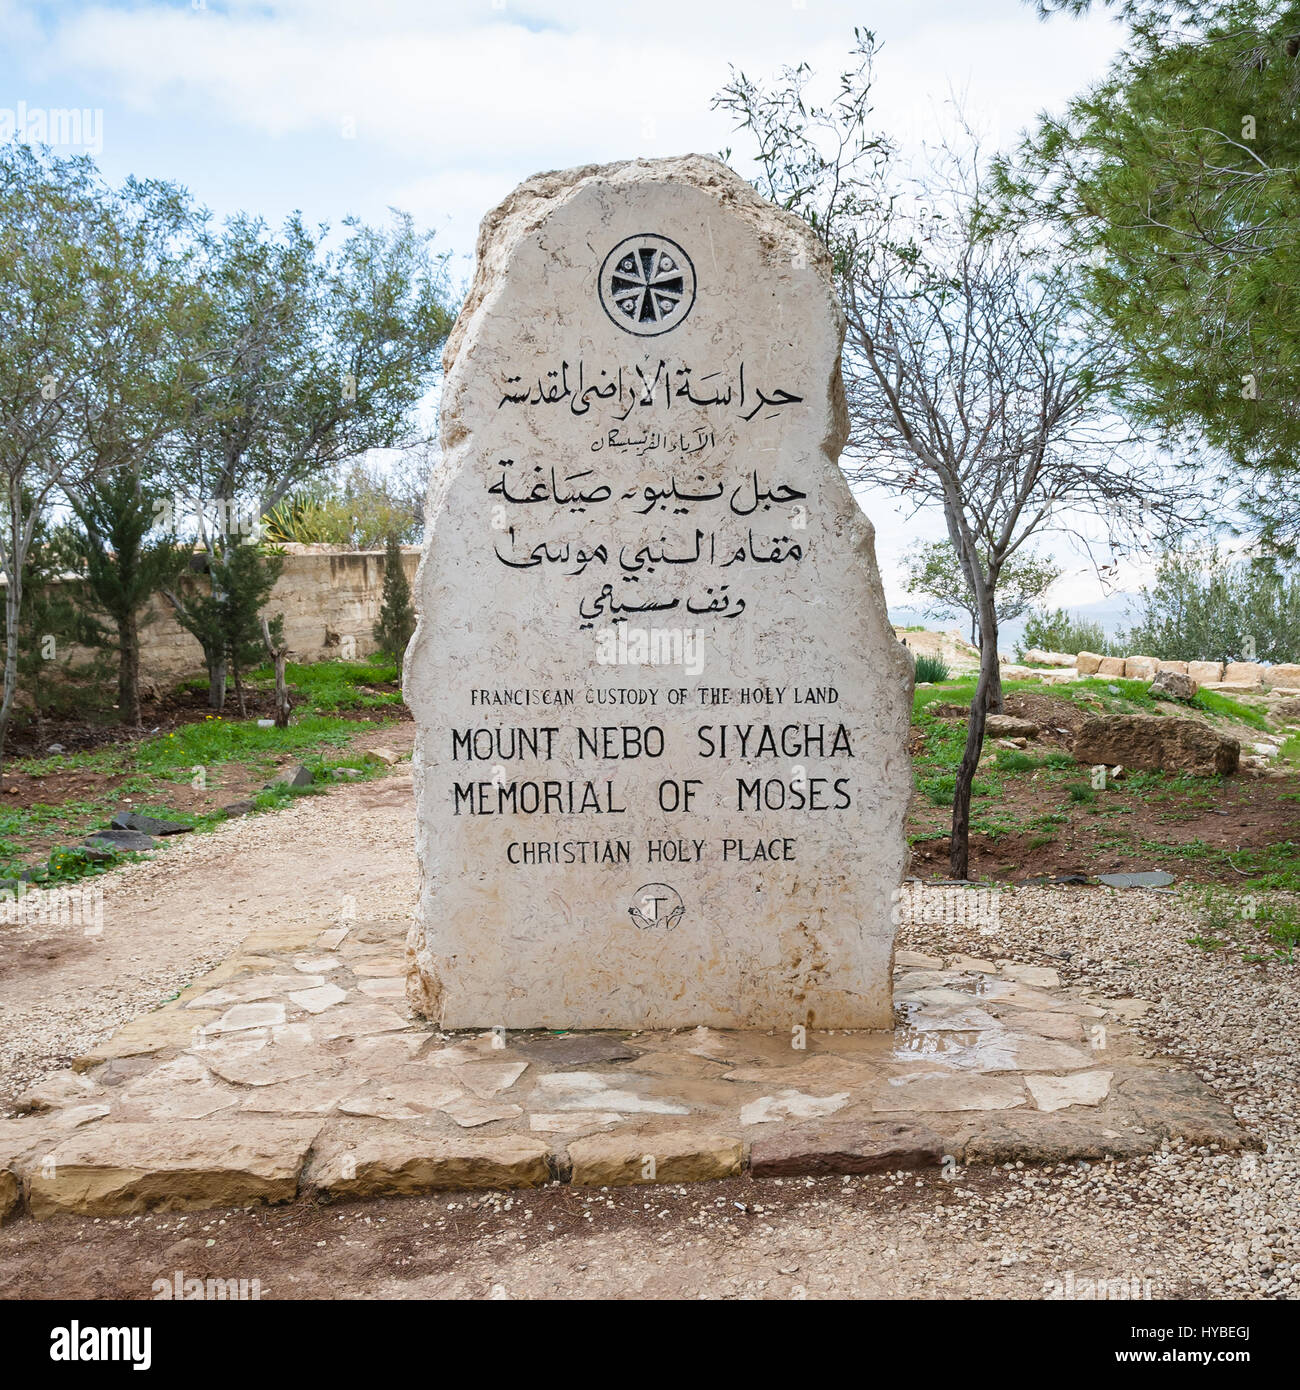 MOUNT NEBO, JORDAN - FEBRUARY 20, 2012: Stone in the entrance to historic Mount Nebo by Moses in Holy Land. Mount Nebo is the place where Moses was gr Stock Photo